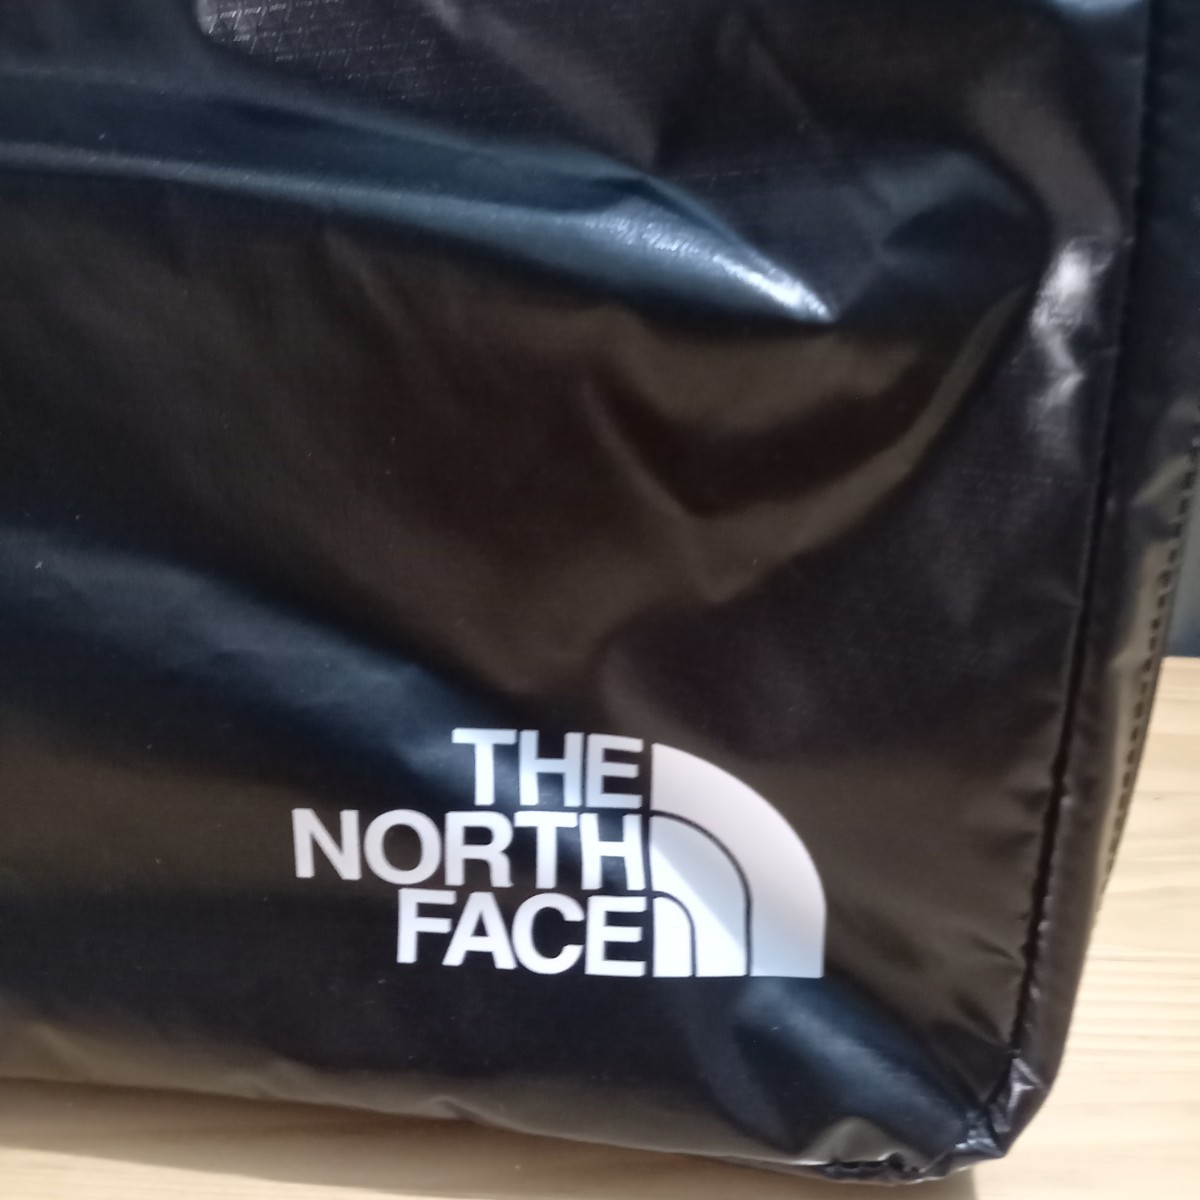 THE NORTH FACE　Loop　travelBOX　M